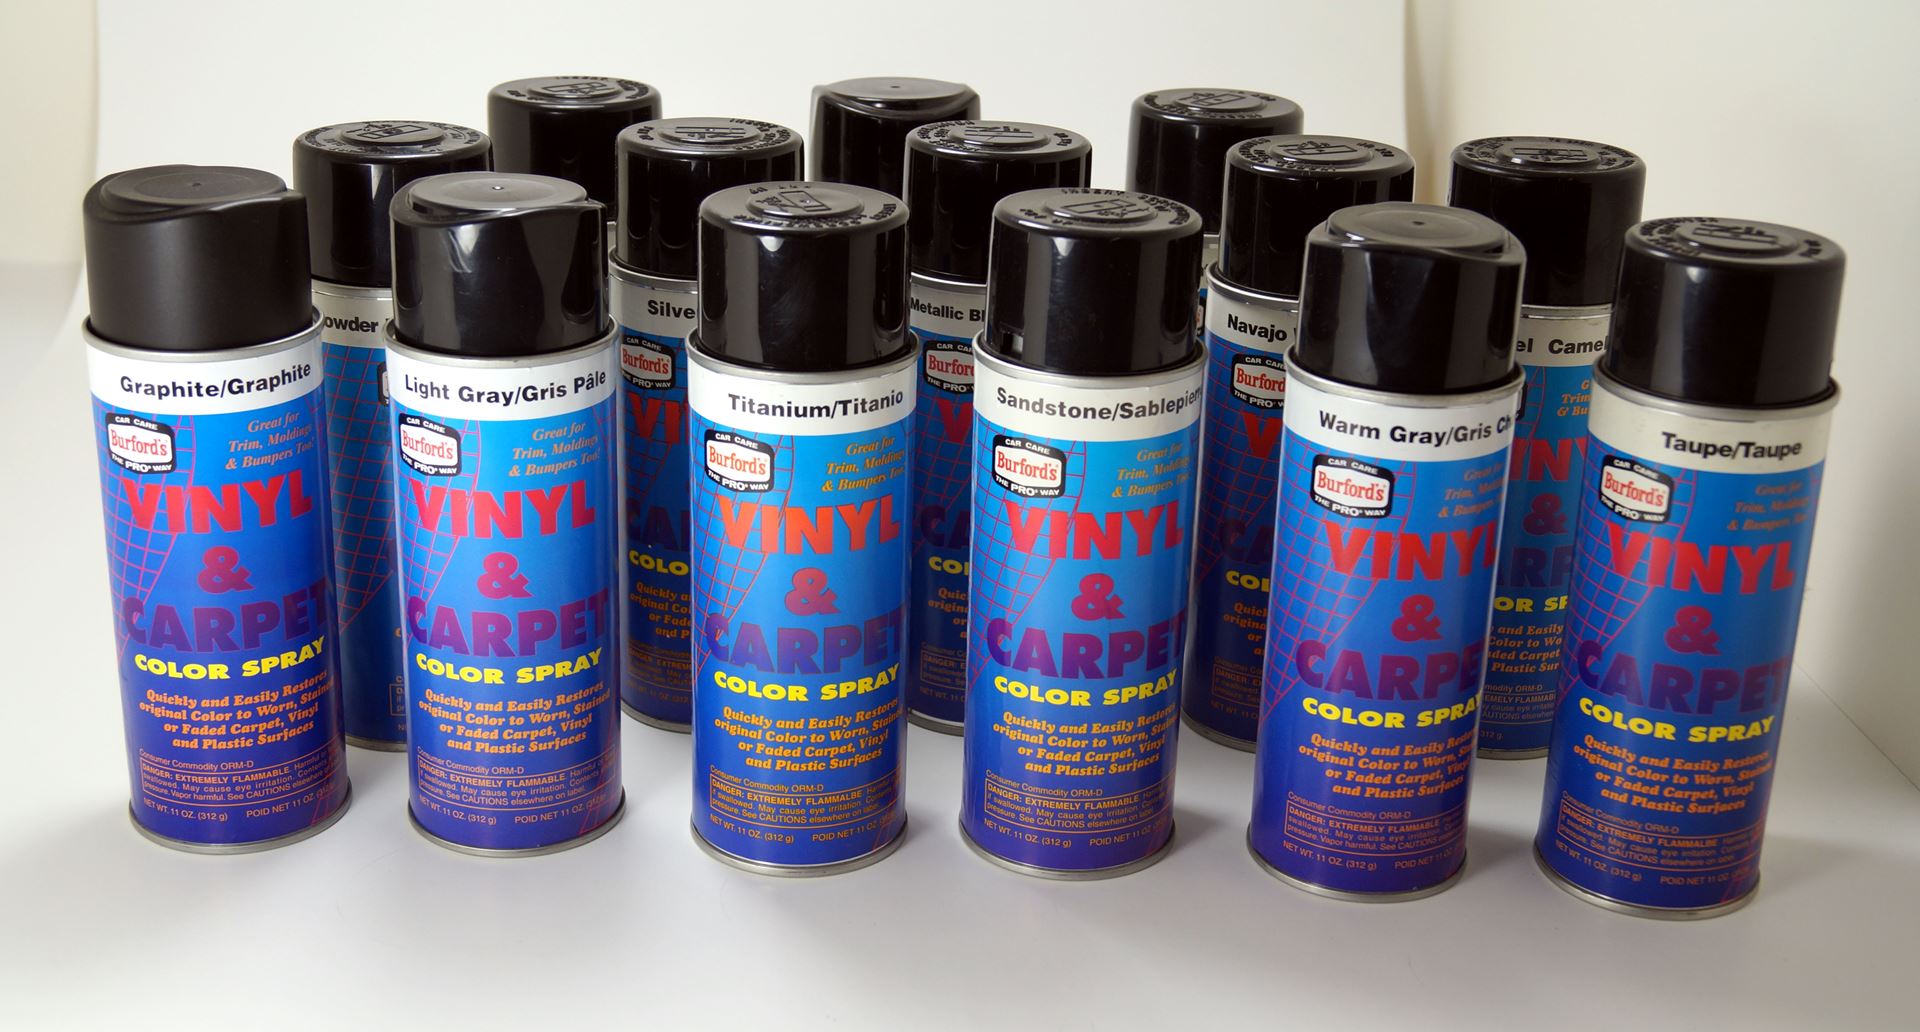 Vinyl Carpet Dyes Professional Detailing Products Because Your Car Is A Reflection Of You